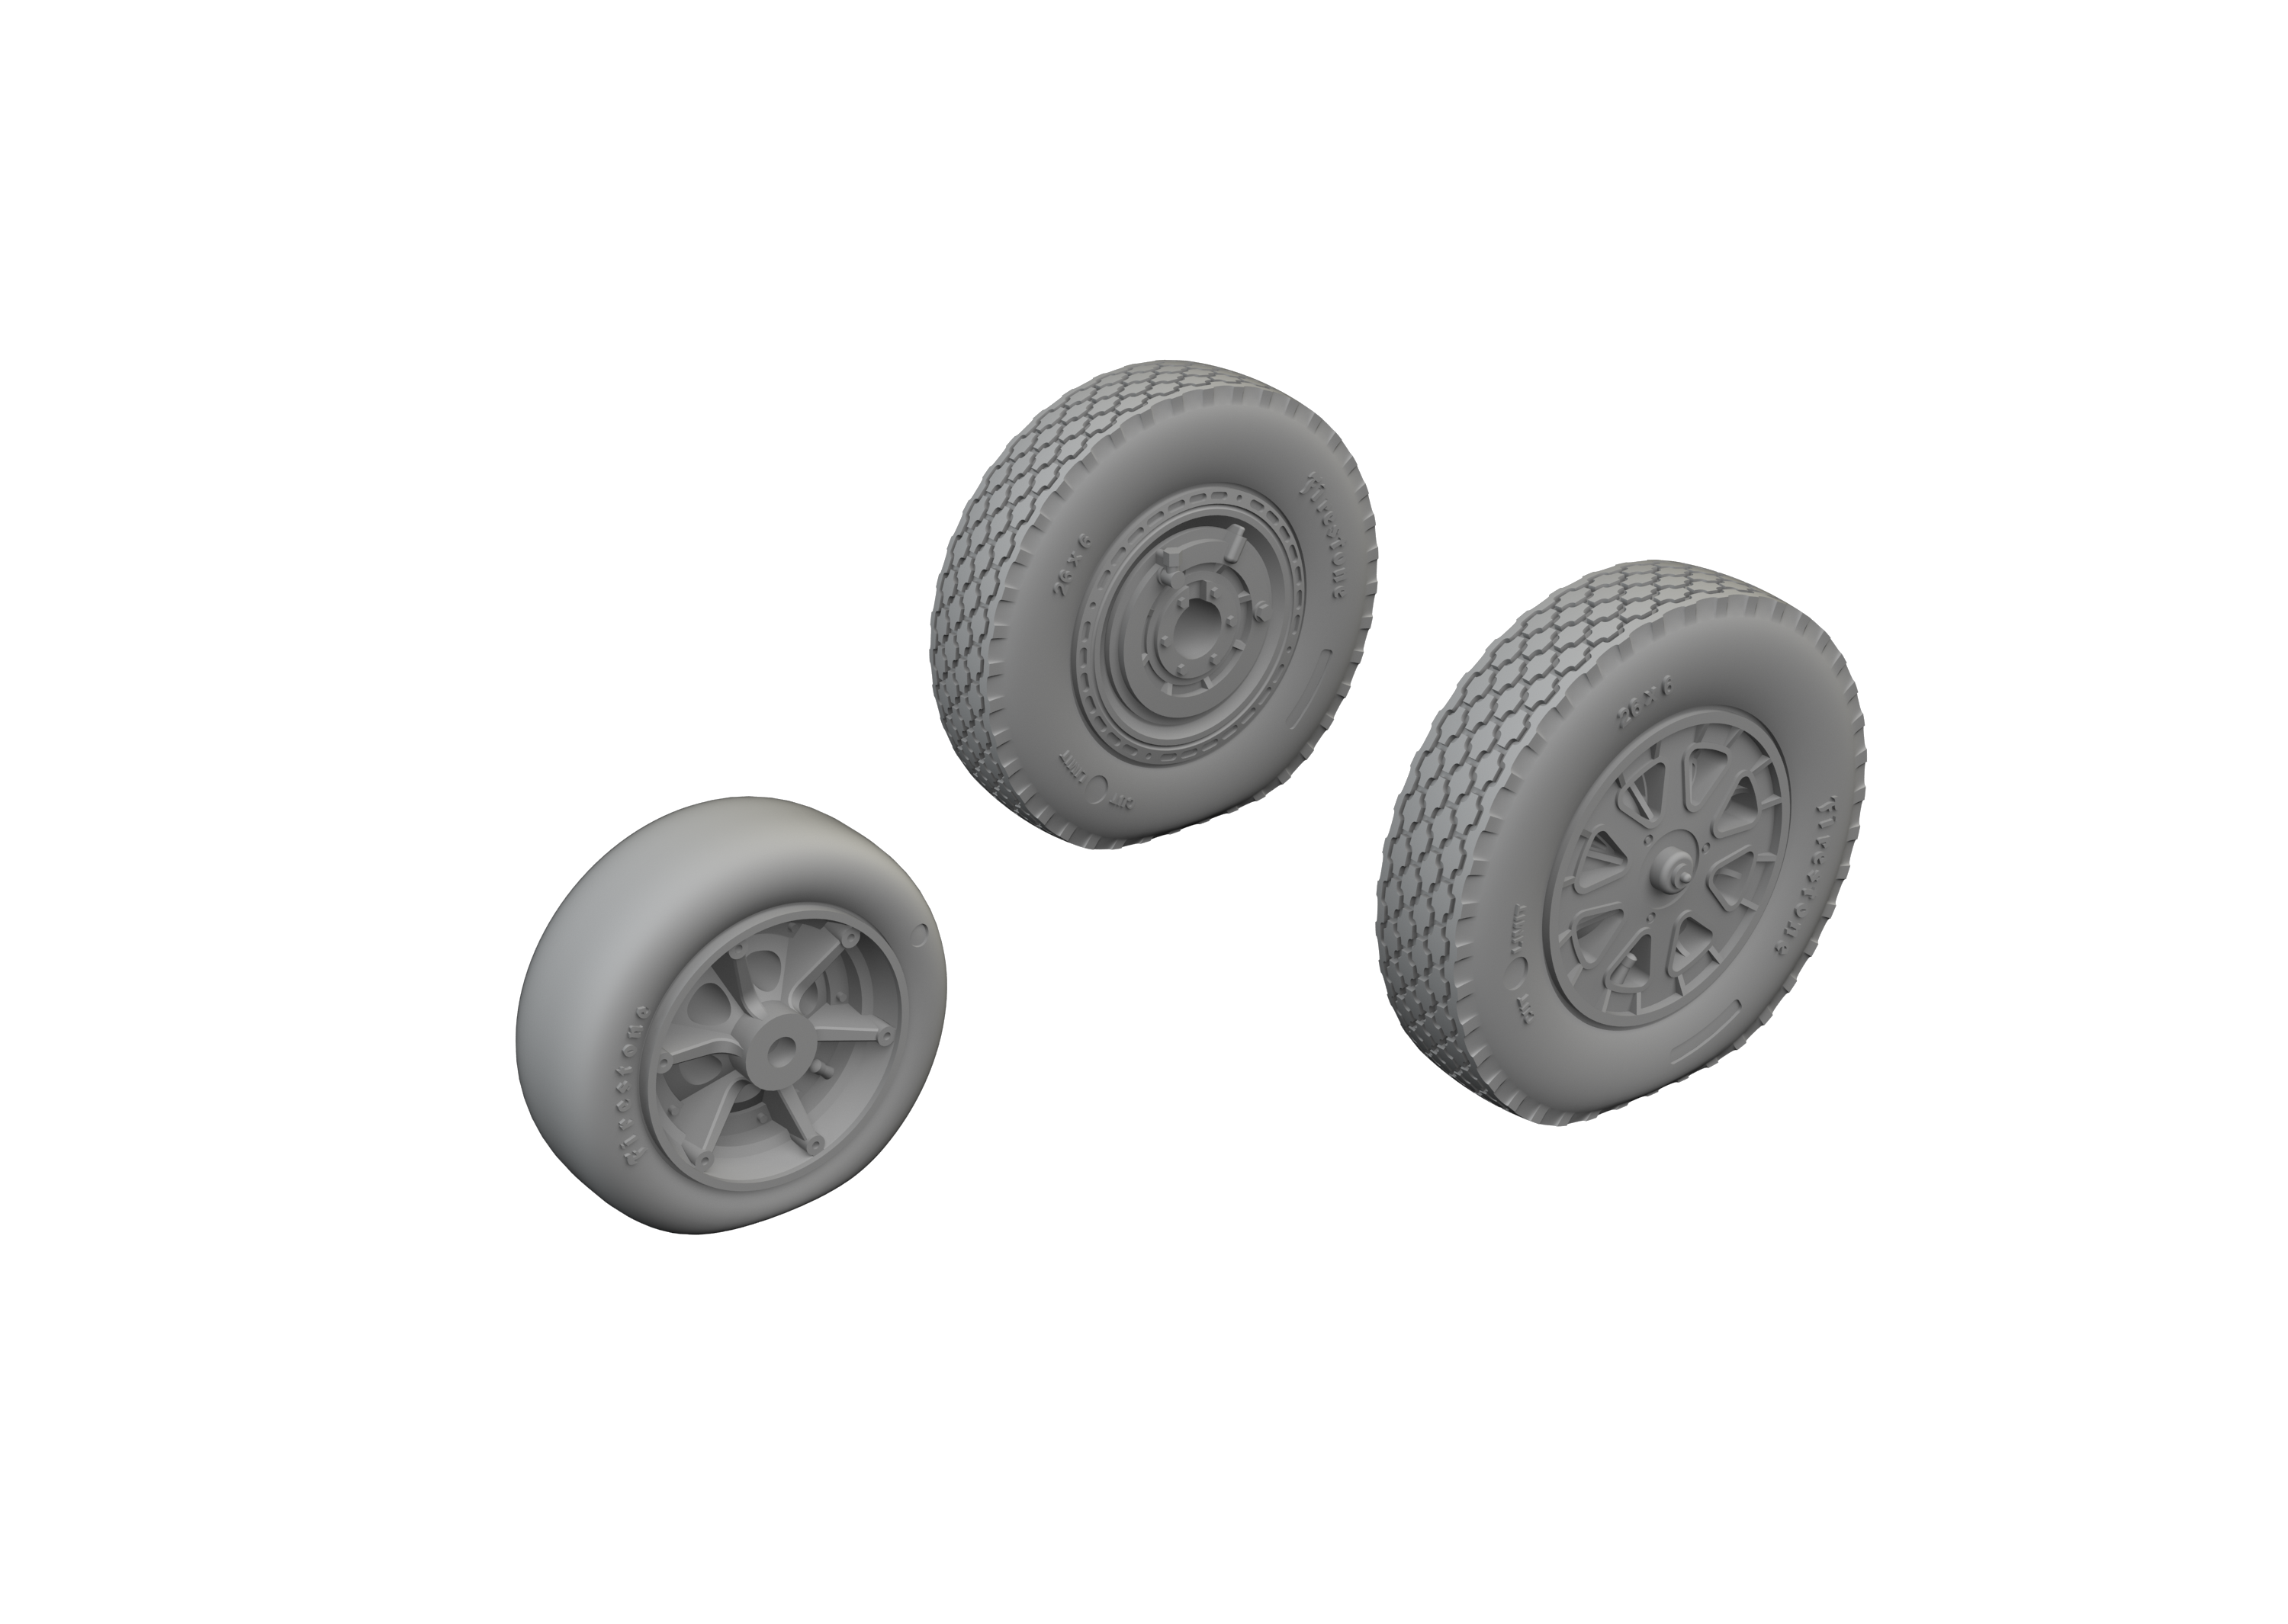 Additions (3D resin printing) 1/72 Bell P-39Q Airacobra wheels 3D-Printed (designed to be used with Arma Hobby kits)